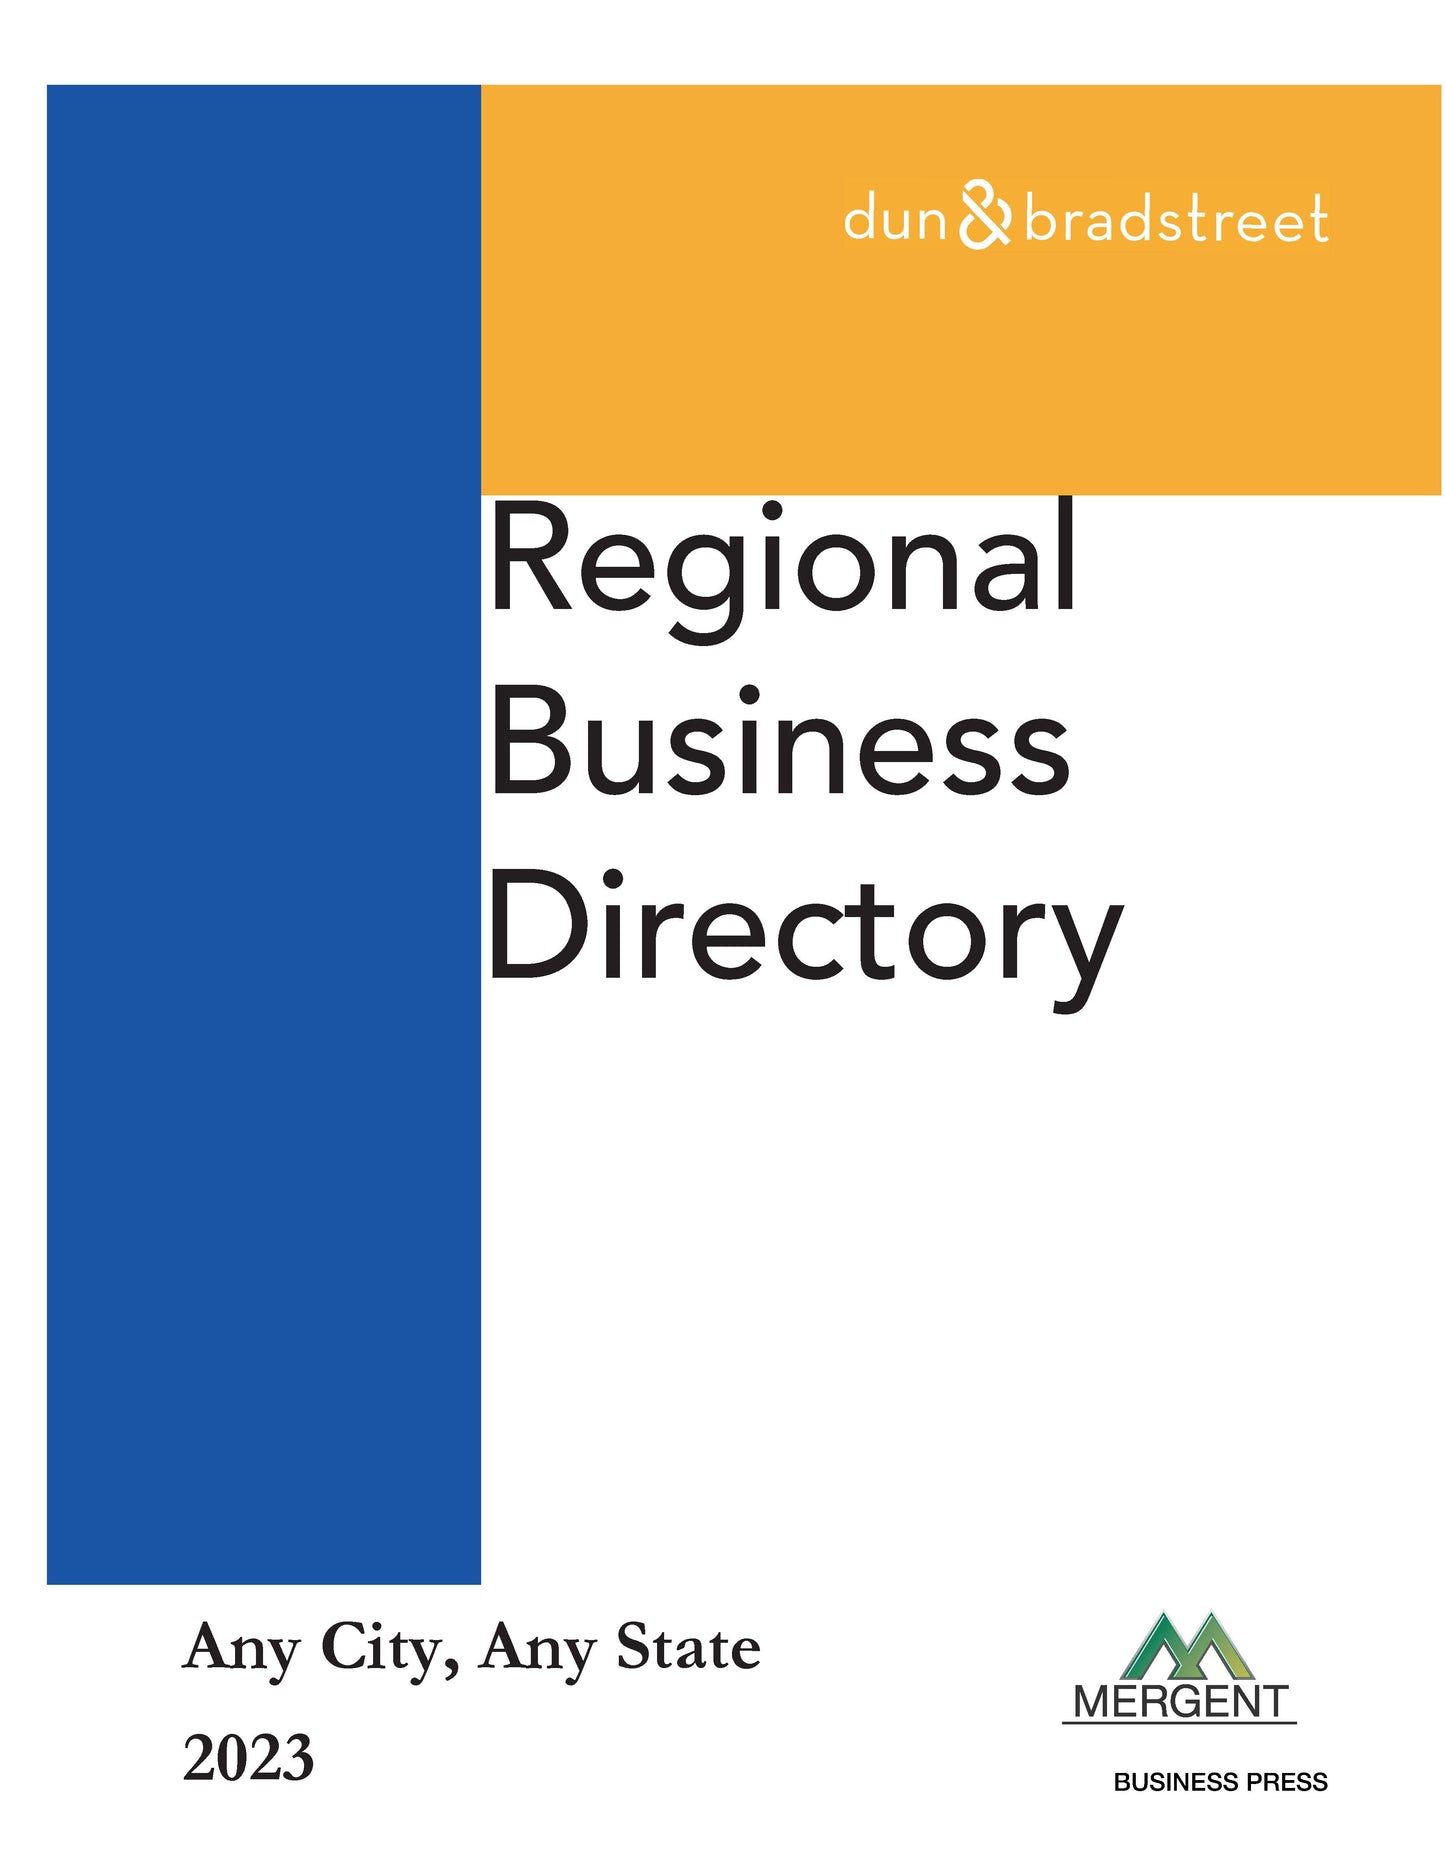 Regional Business Directory - Central Indiana